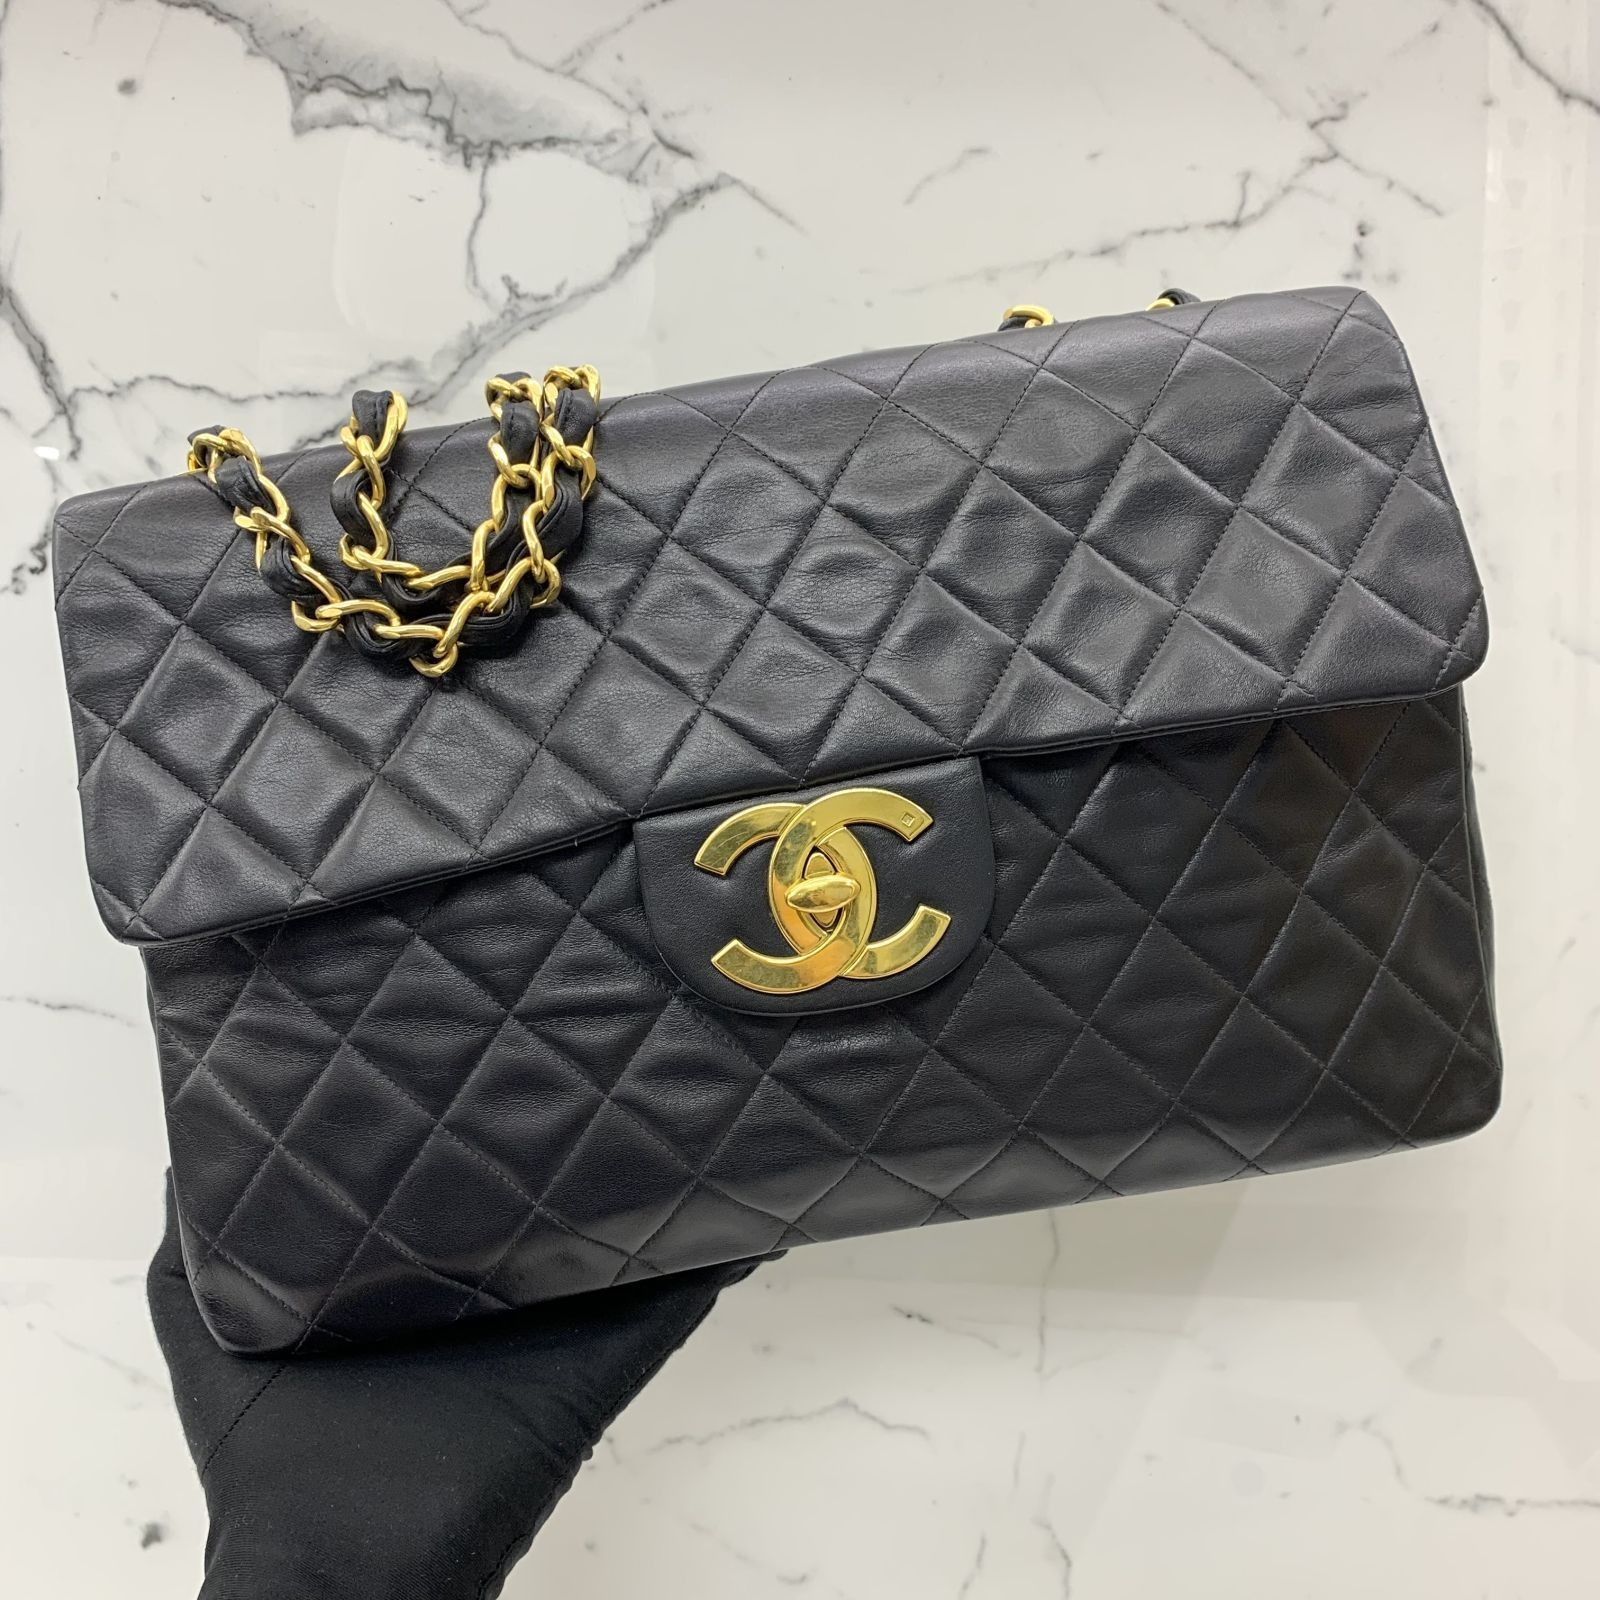 Chanel Chanel 13 Maxi Jumbo Black Quilted Leather Shoulder Flap Bag